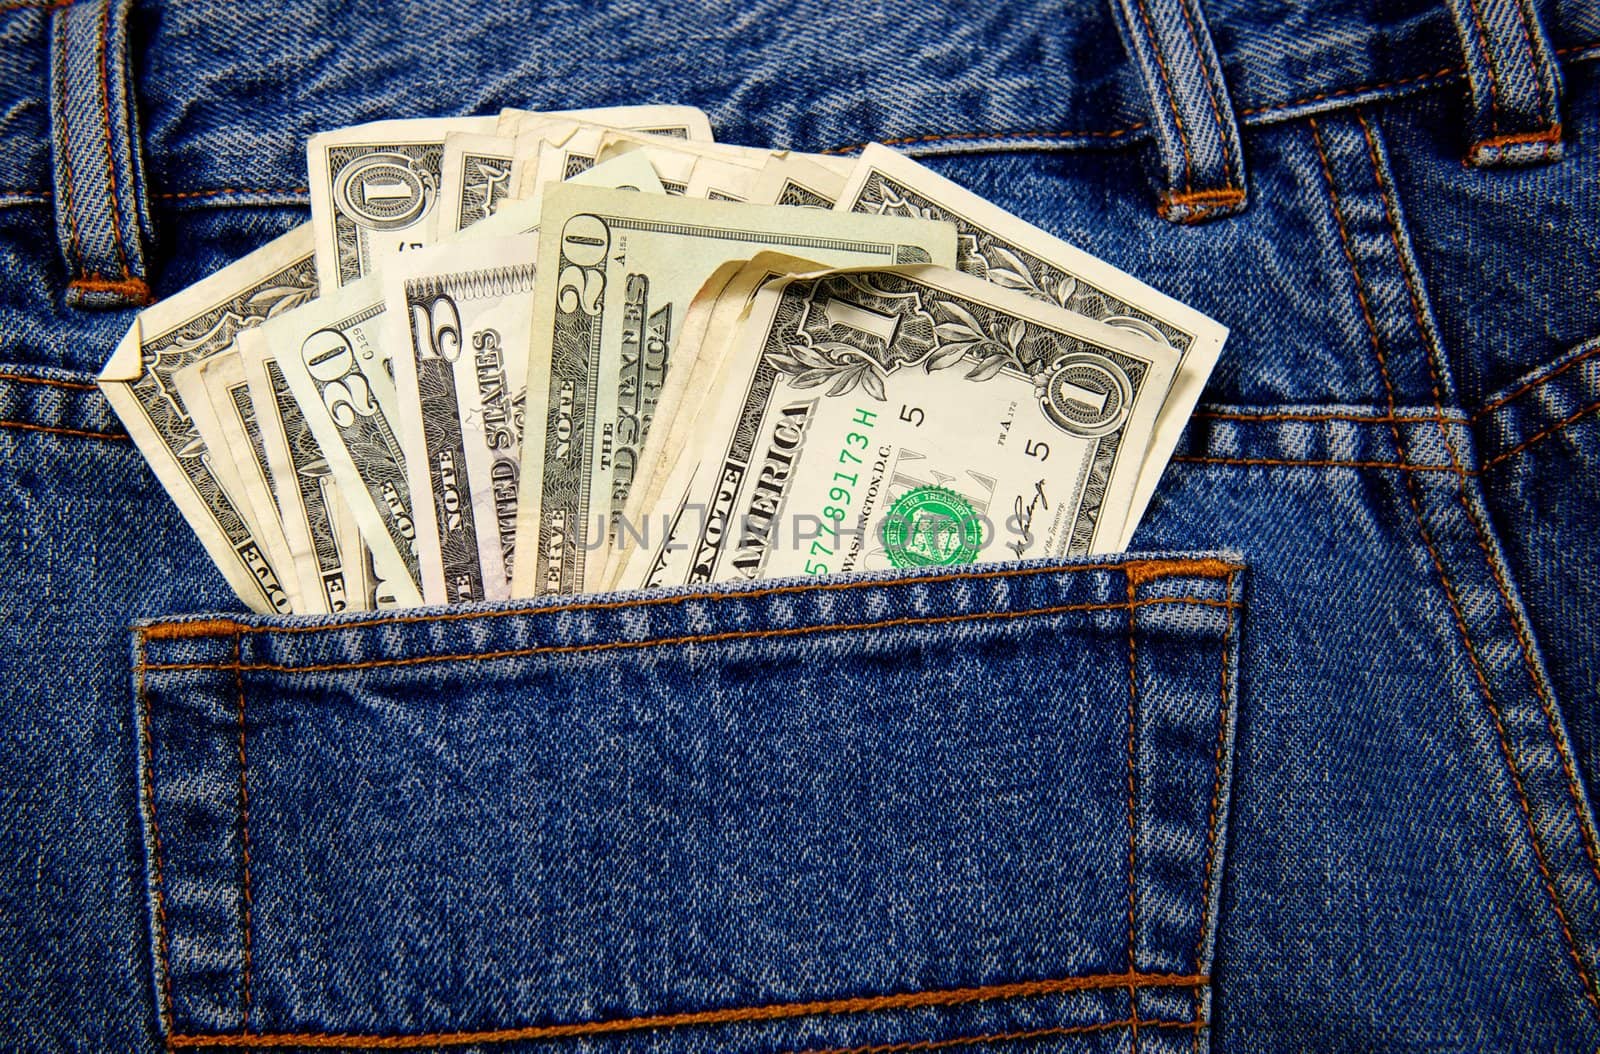 A back pocket of a pair of blue jeans full of currency in US Dollars